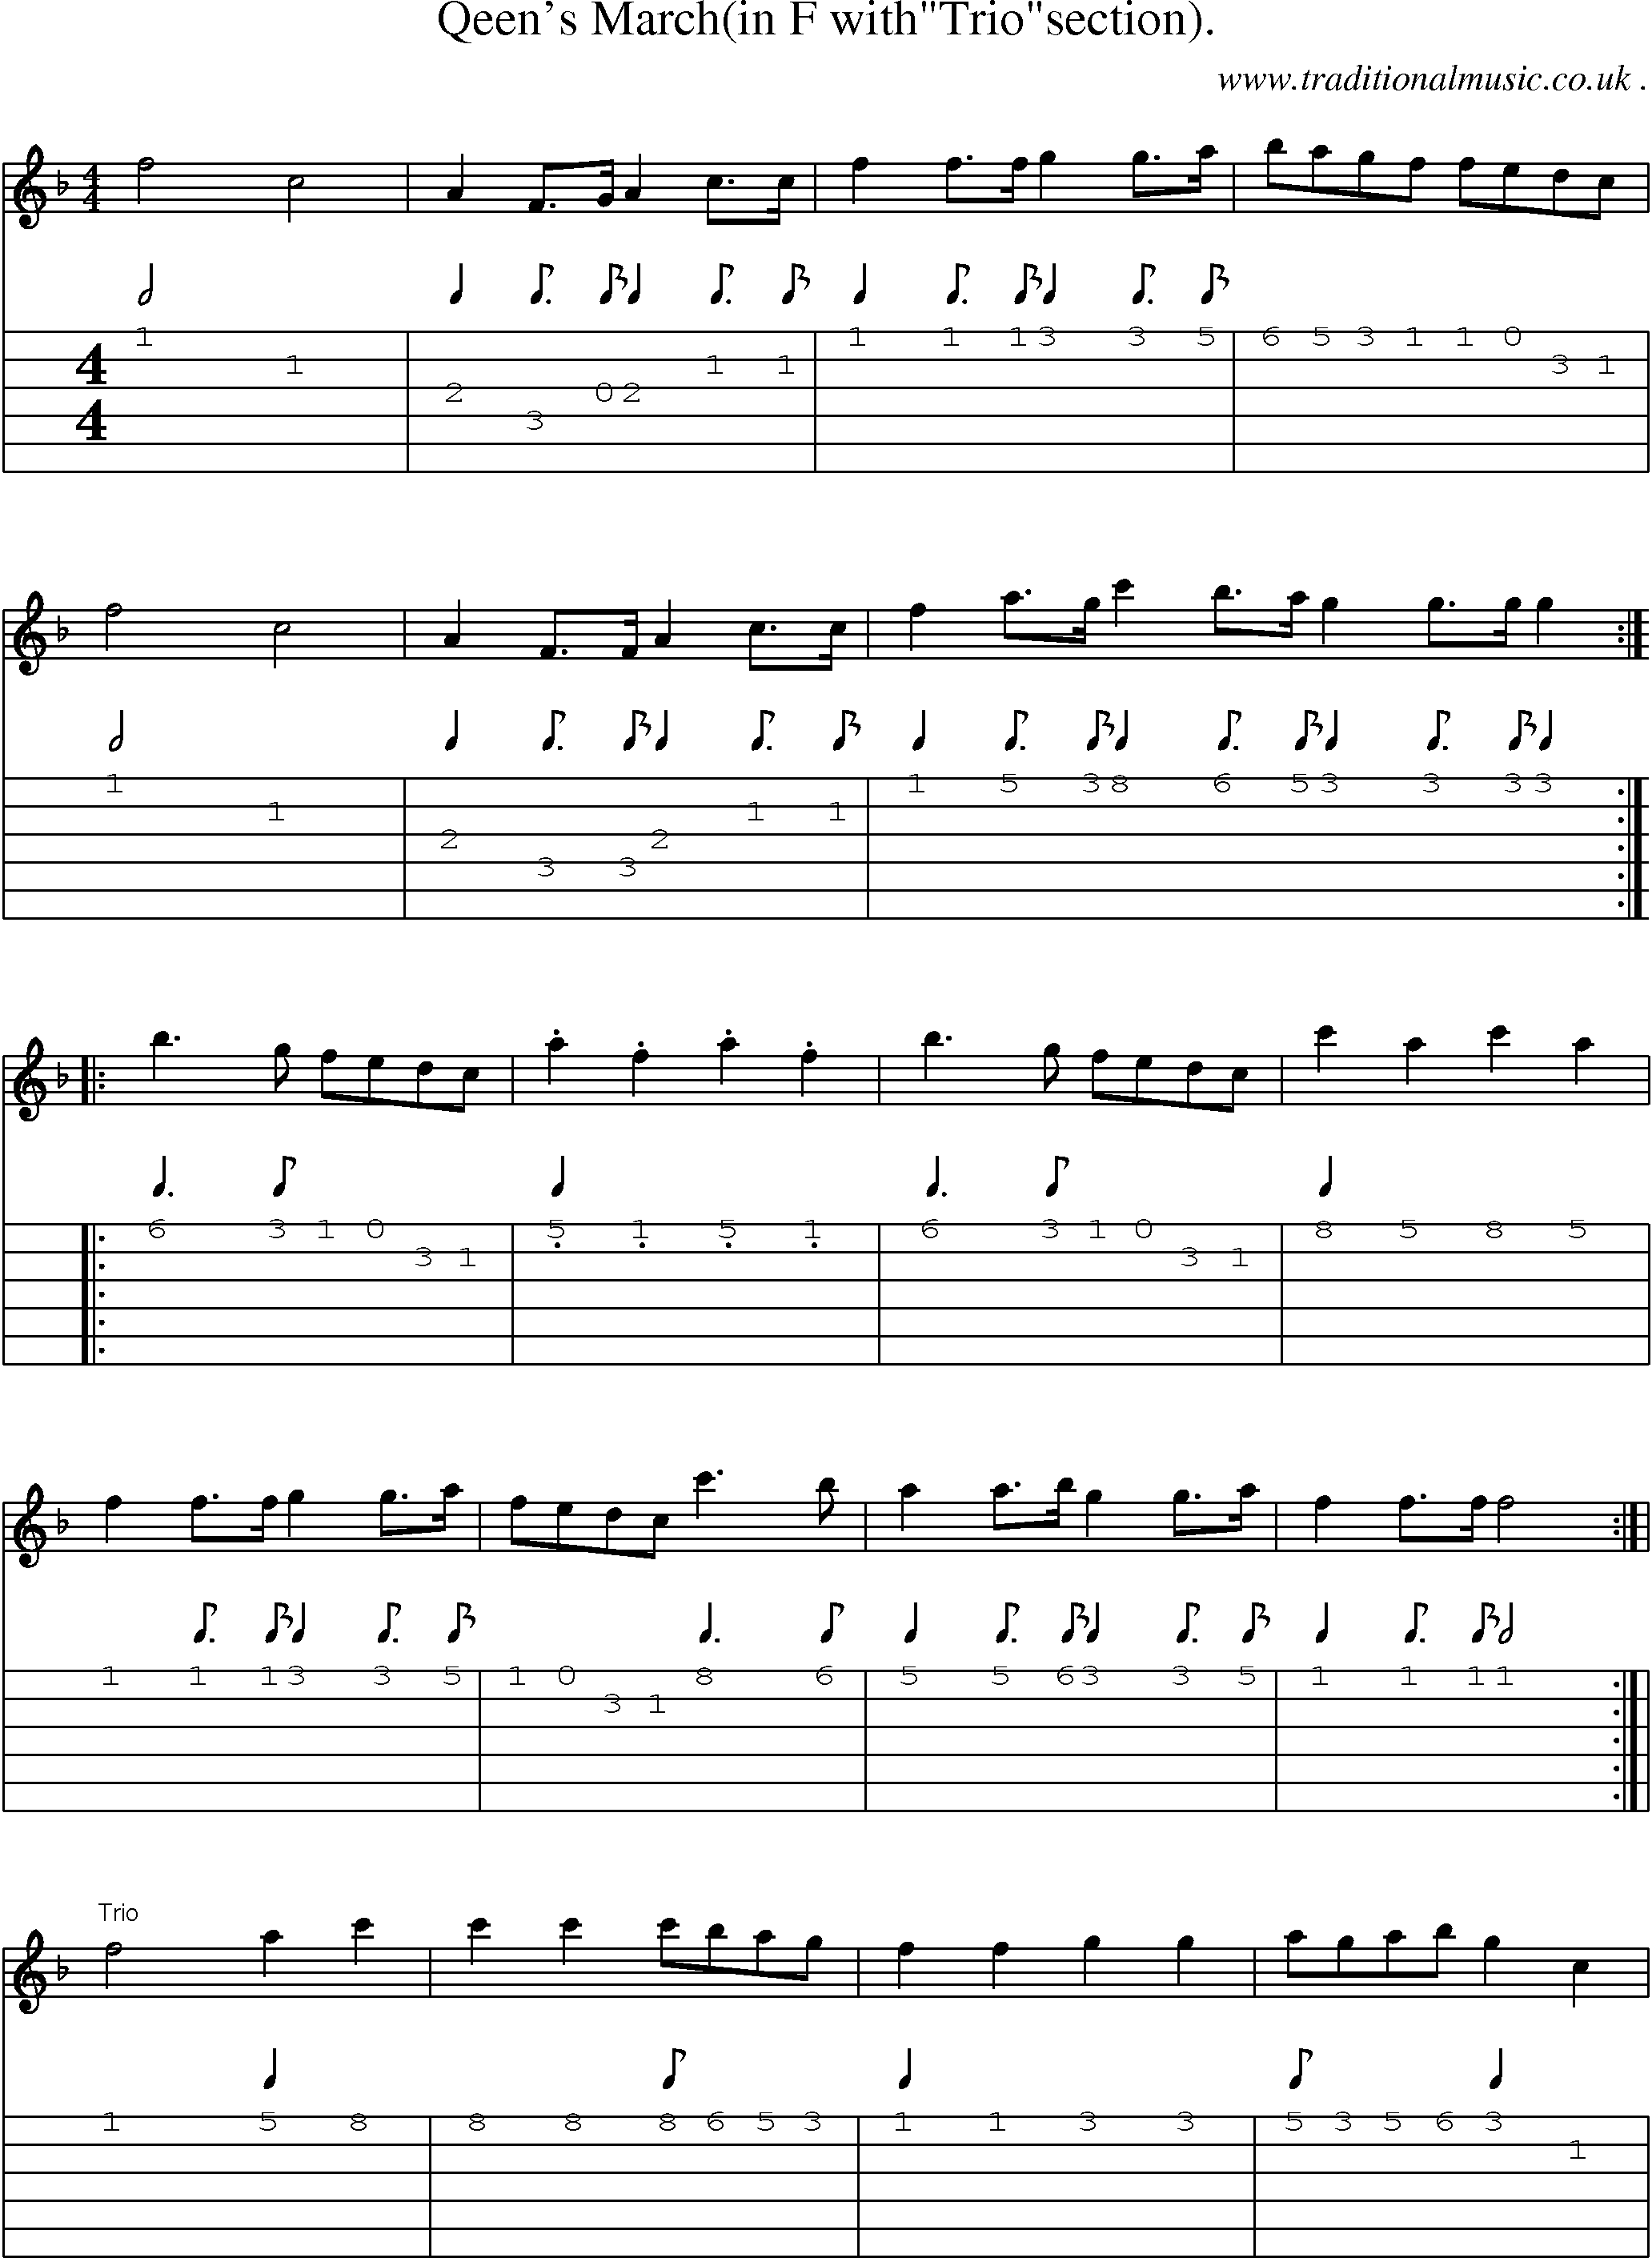 Sheet-Music and Guitar Tabs for Qeens March(in F Withtriosection)